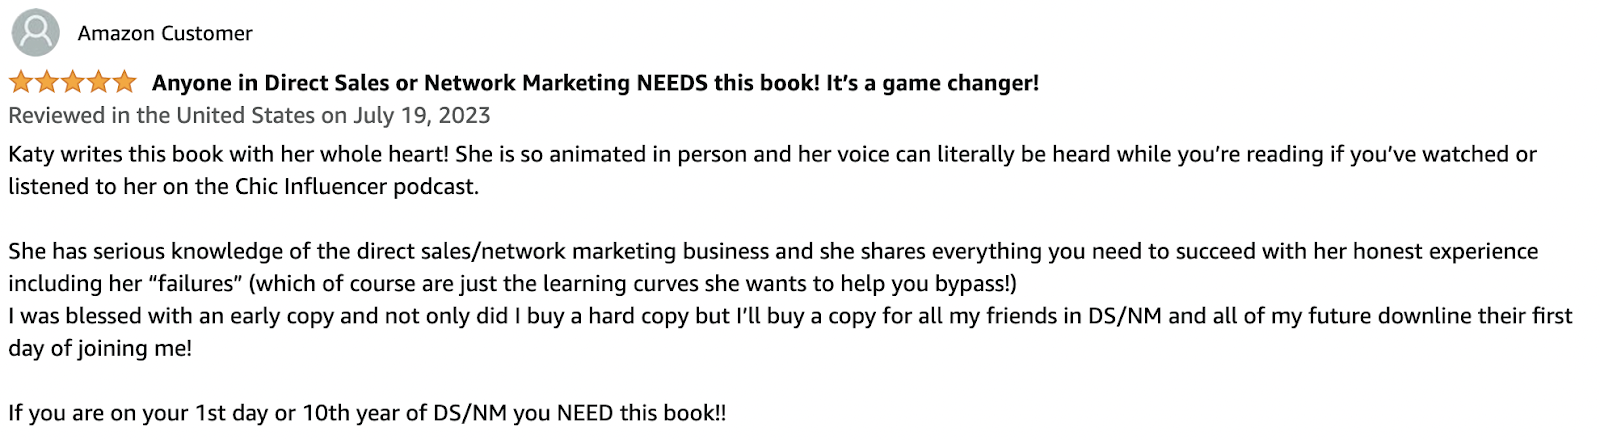  Anyone in Direct Sales or Network Marketing NEEDS this book! It’s a game changer! Katy writes this book with her whole heart! She is so animated in person and her voice can literally be heard while you’re reading if you’ve watched or listened to her on the Chic Influencer podcast. She has serious knowledge of the direct sales/network marketing business and she shares everything you need to succeed with her honest experience including her “failures” (which of course are just the learning curves she wants to help you bypass!) I was blessed with an early copy and not only did I buy a hard copy but I’ll buy a copy for all my friends in DS/NM and all of my future downline their first day of joining me! If you are on your 1st day or 10th year of DS/NM you NEED this book!!